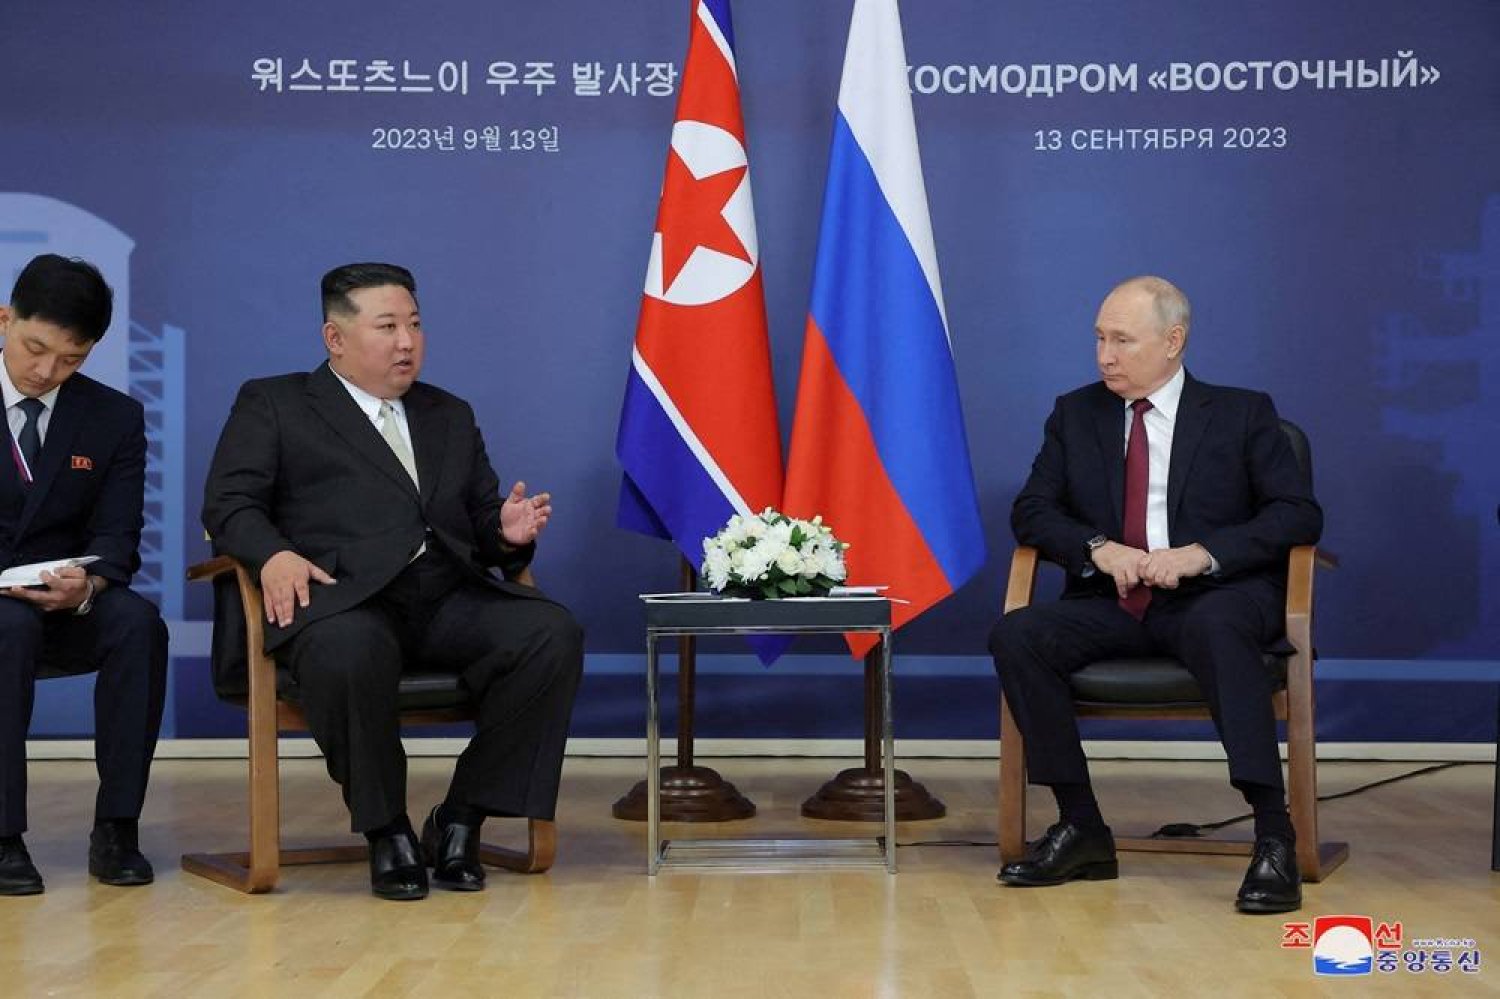 Russia's President Vladimir Putin and North Korea's leader Kim Jong Un attend a meeting at the Vostochny Cosmodrome in the far eastern Amur region, Russia, September 13, 2023 in this image released by North Korea's Korean Central News Agency. (KCNA via Reuters)